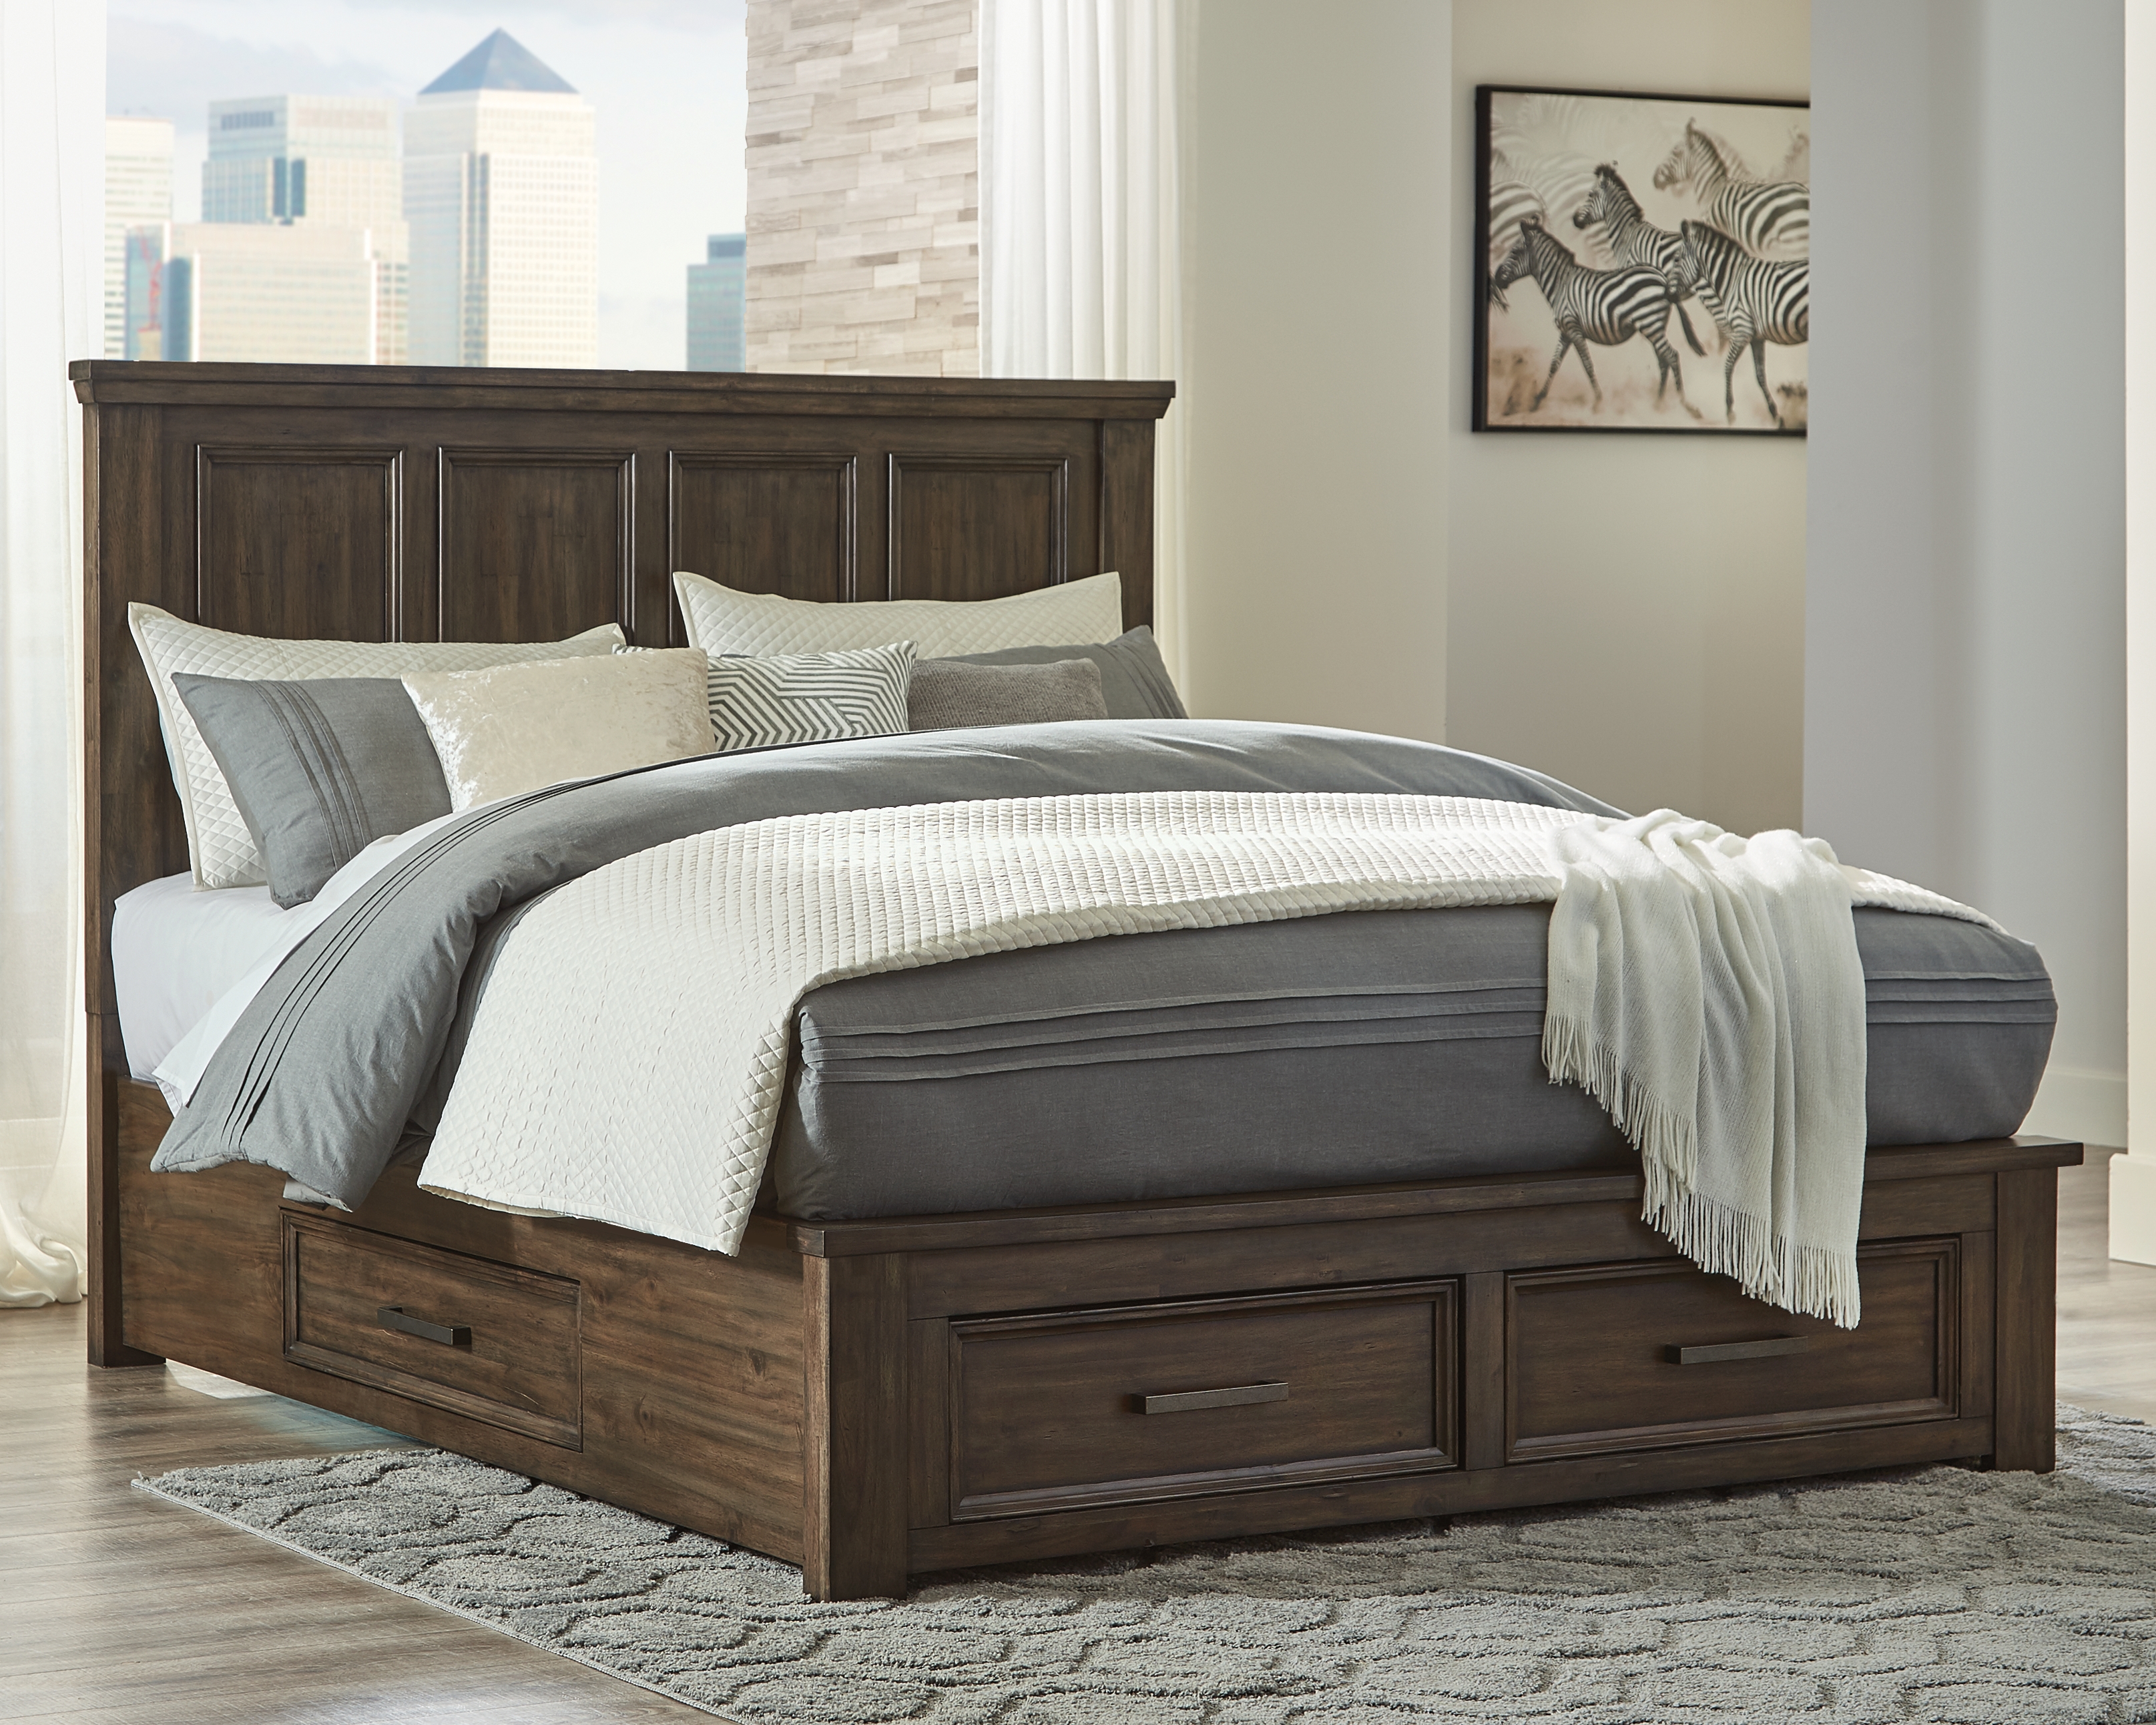 Johurst California King Panel Bed With, California King Bed Frame With Headboard And Storage